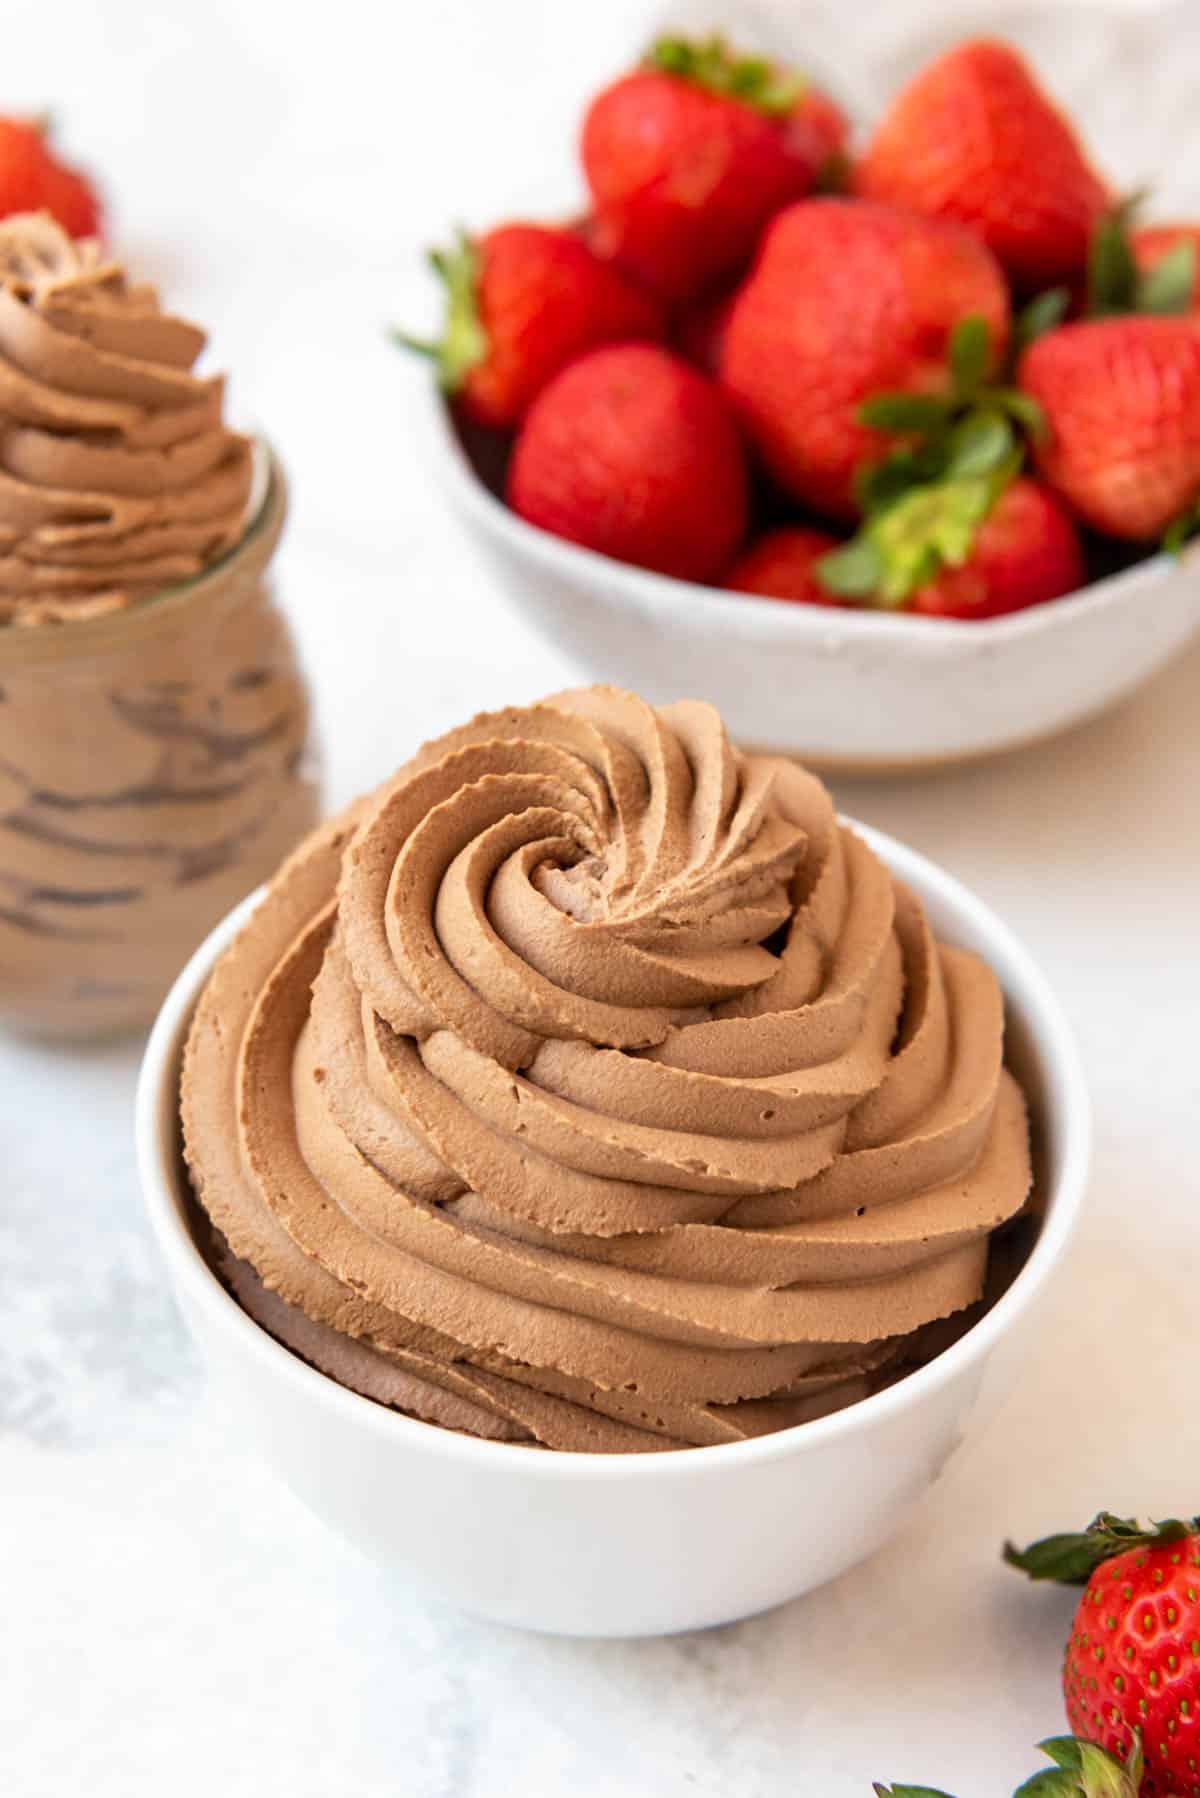 A bowl of chocolate whipped cream with a bowl of strawberries behind it.